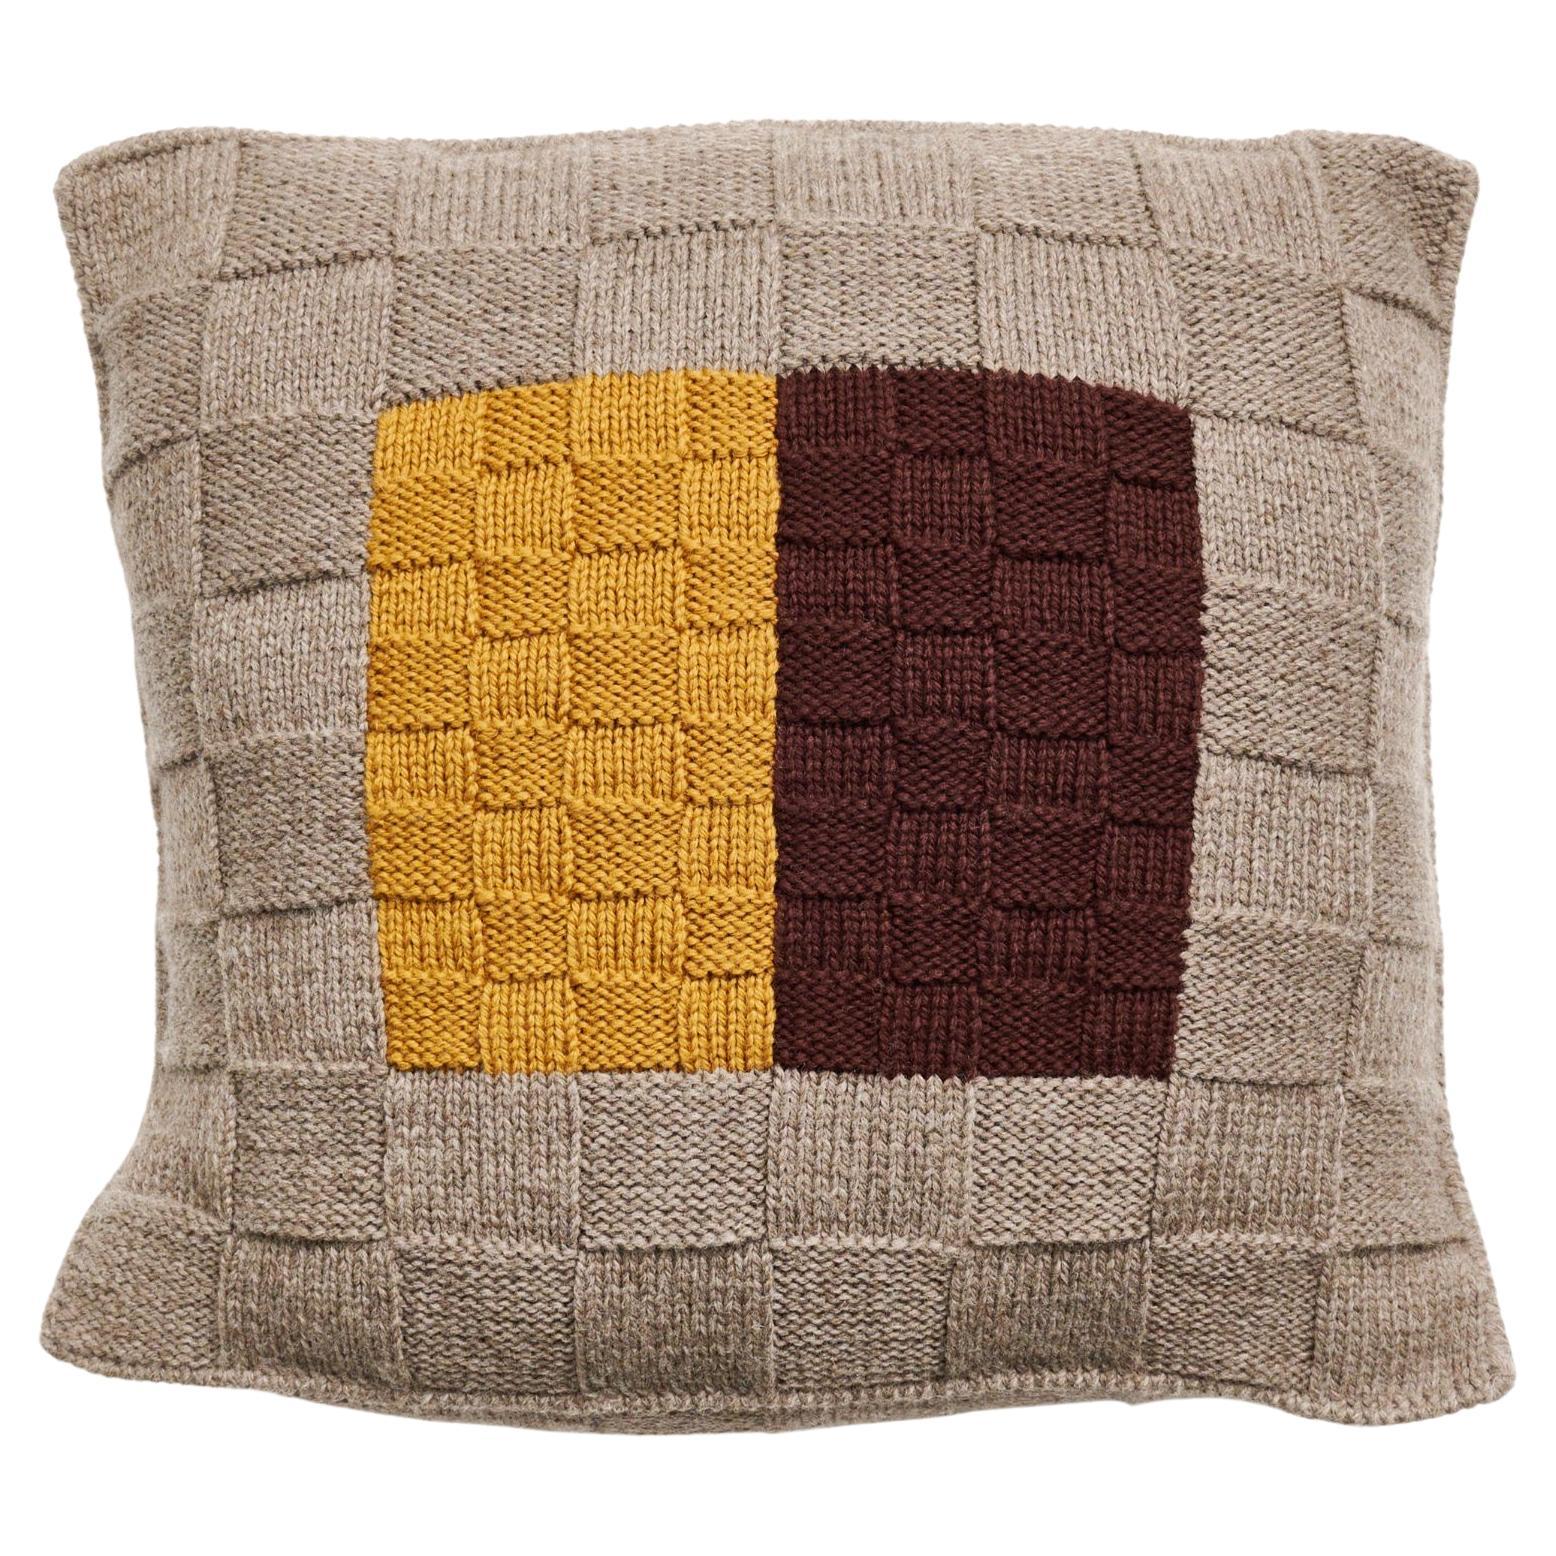 Andes Topaz Pillow Hand Knitted By Peruvian Artisans in Andean Highland Wool